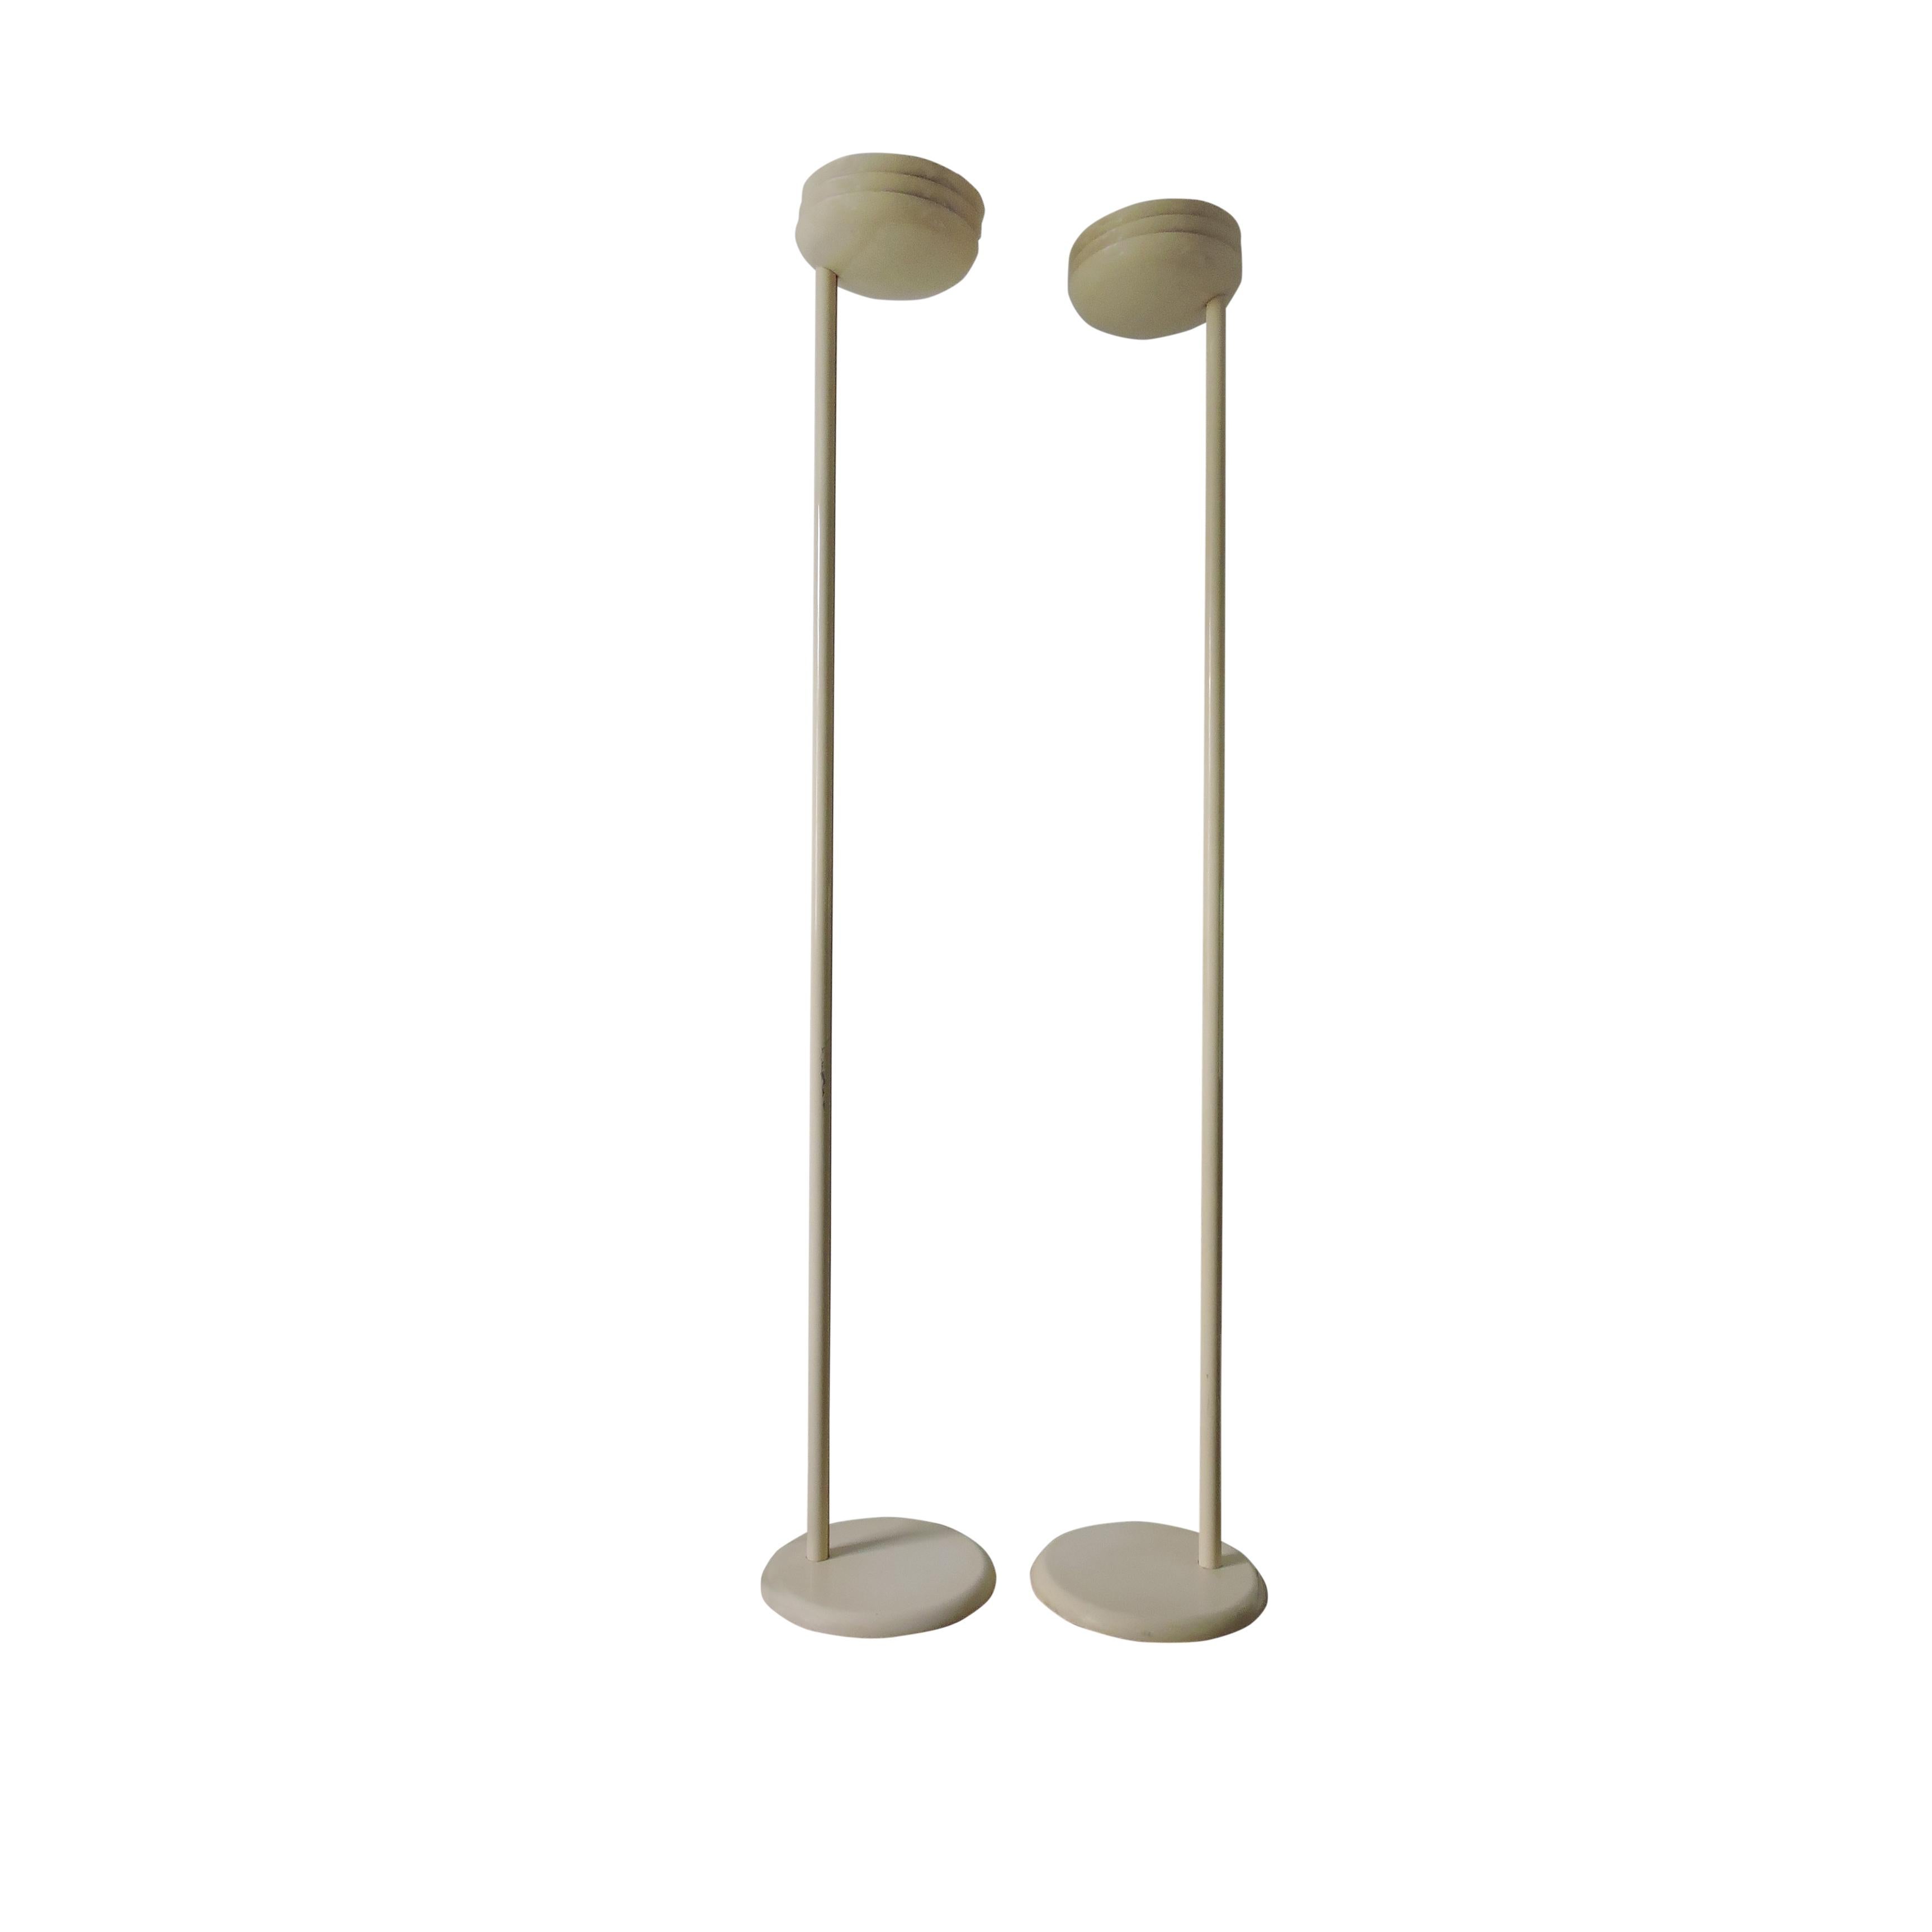 This pair of tall cream floor lamps was produced by Relux in Milan, Italy. The lamps feature reverse dome tops which create a soft up lit glow and a dimmable switch. The lamps are model RL 101/5.